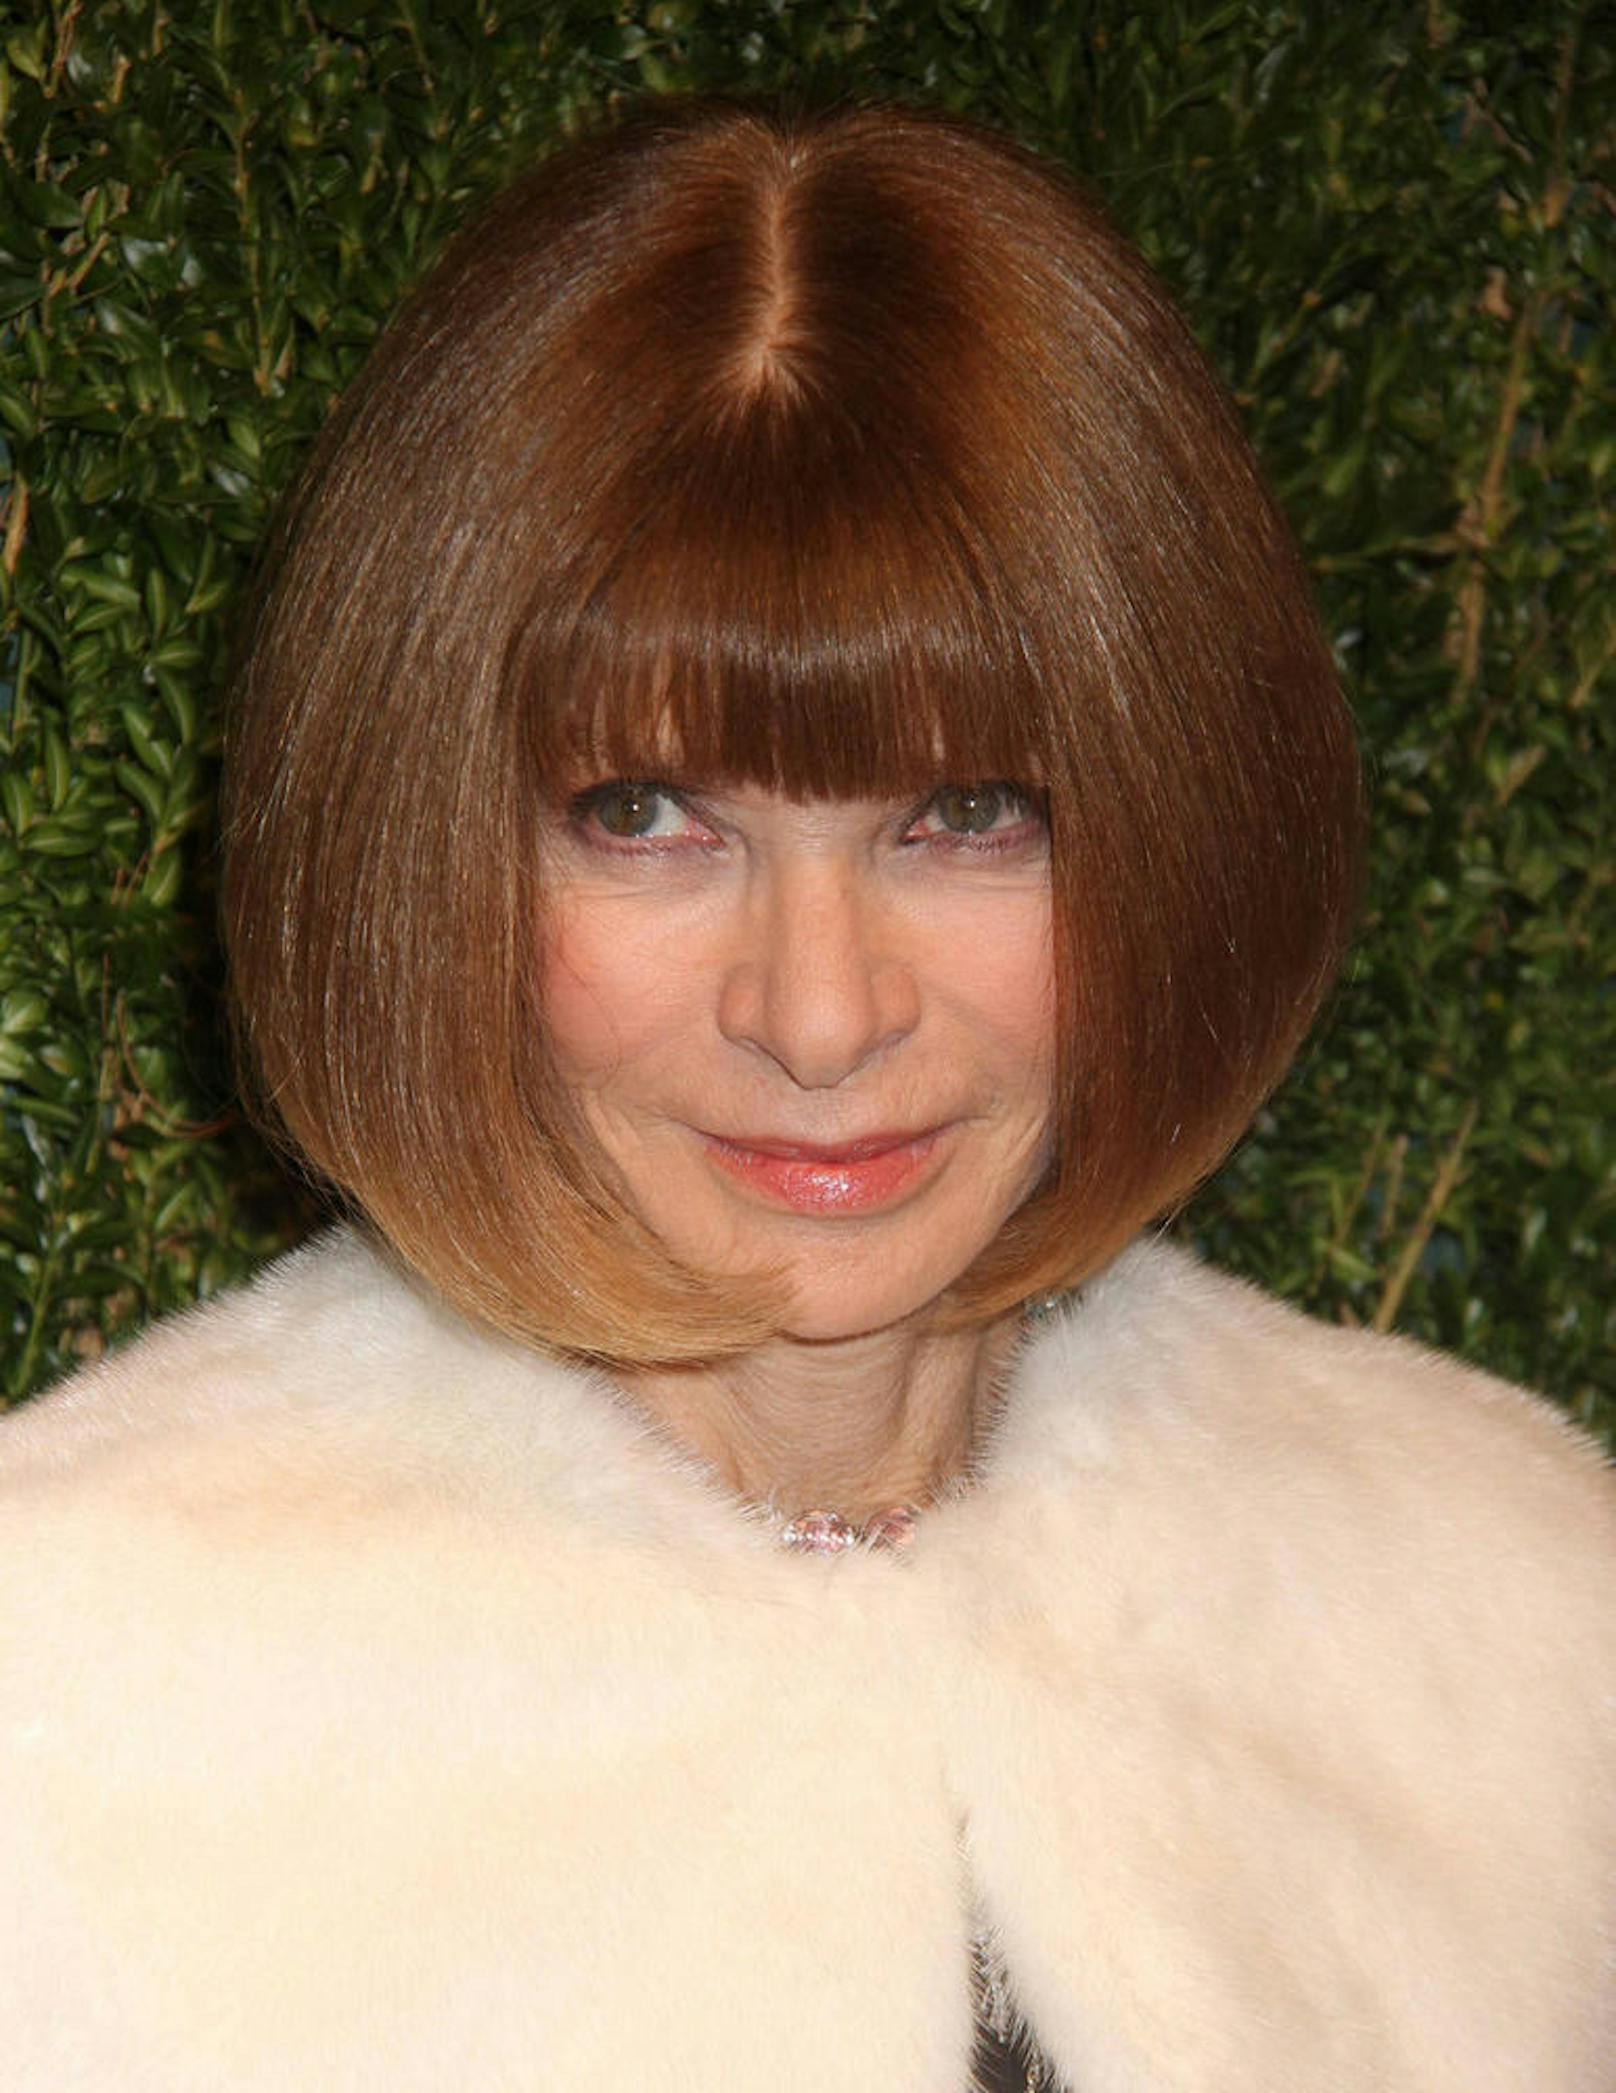 Anna Wintour in New York!